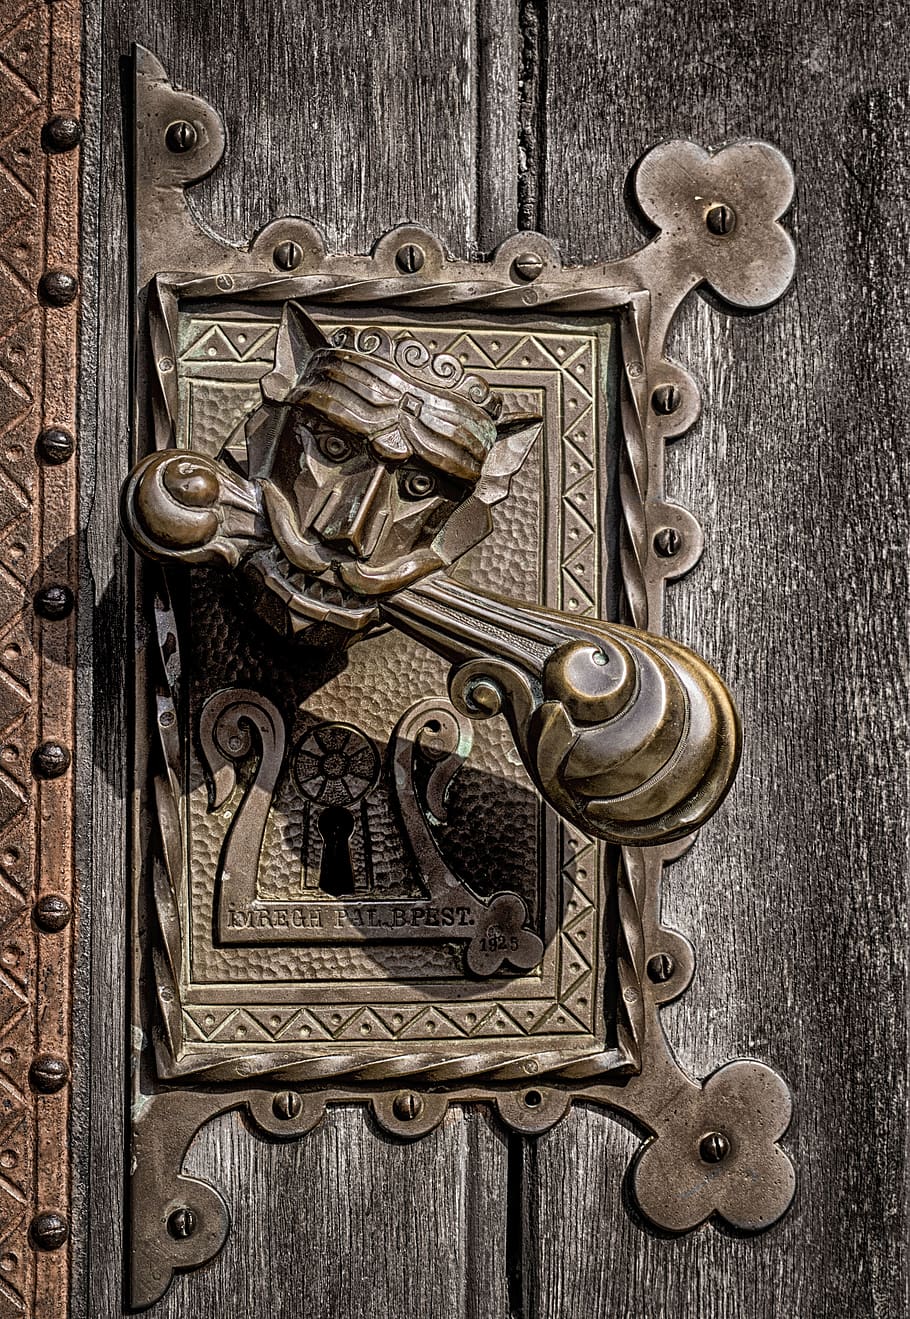 handle, nearby, door, forging, style, forged, doors, old, entrance, wood - material